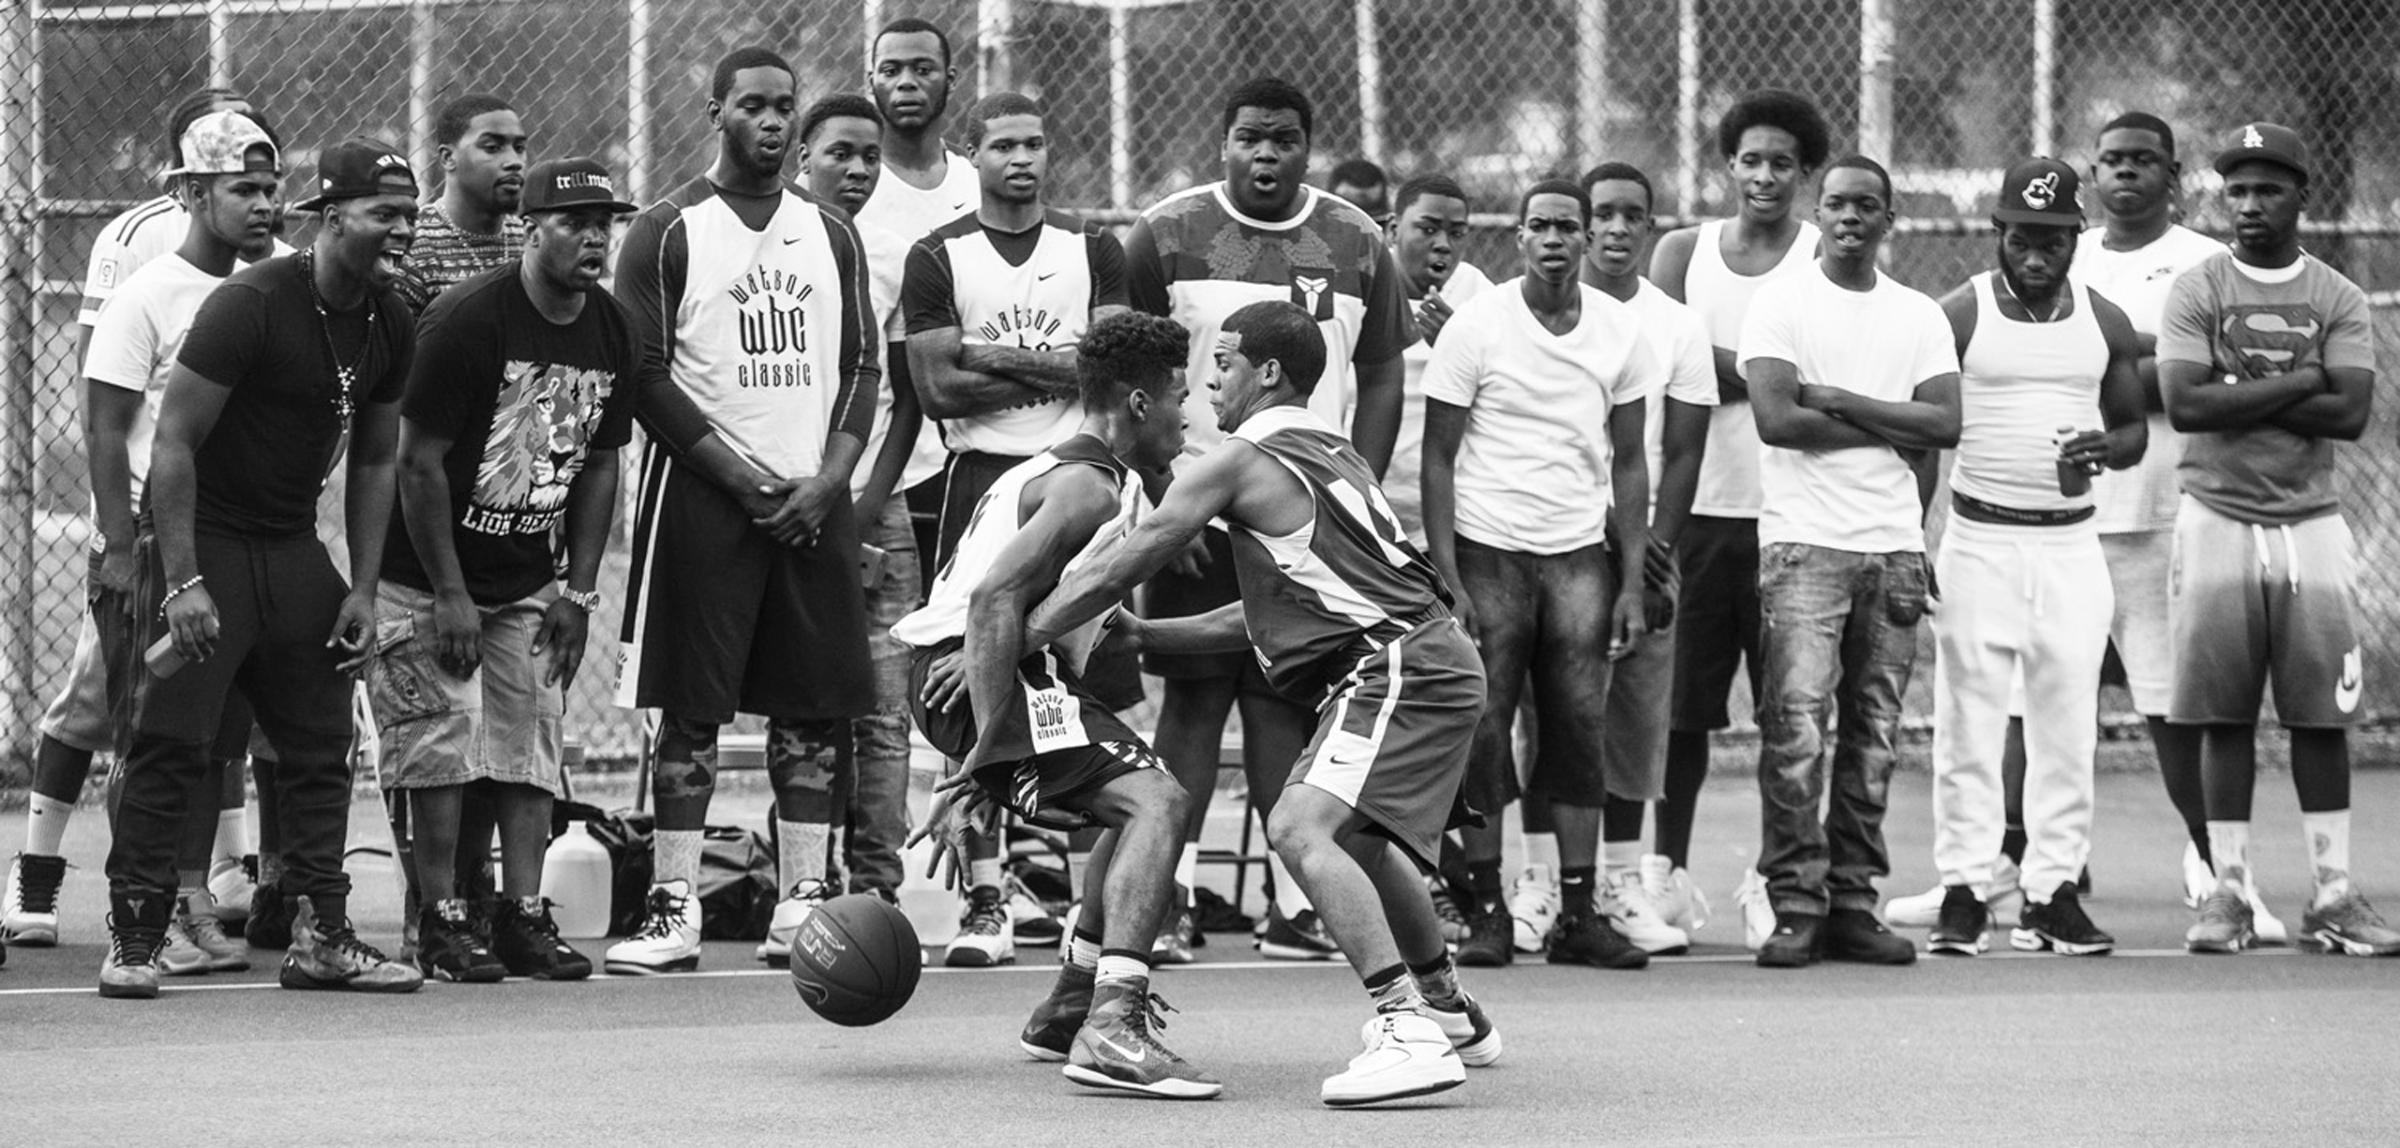 Another key thing about streetball..the art of breaking ankles and making your opponent looklike a fool attempting to guard you from scoring. This is where you tell your teammates to backoff while you clown your opponent, and that’s exactly what happened when I was photographingJerron Love play in the Bronx my first time shooting him in action. He toyed with his opponent,doing crossovers, behind the legs dribbling. It brought memories back of me watching AllenIverson crossing over damn near anybody he playing against in the NBA.